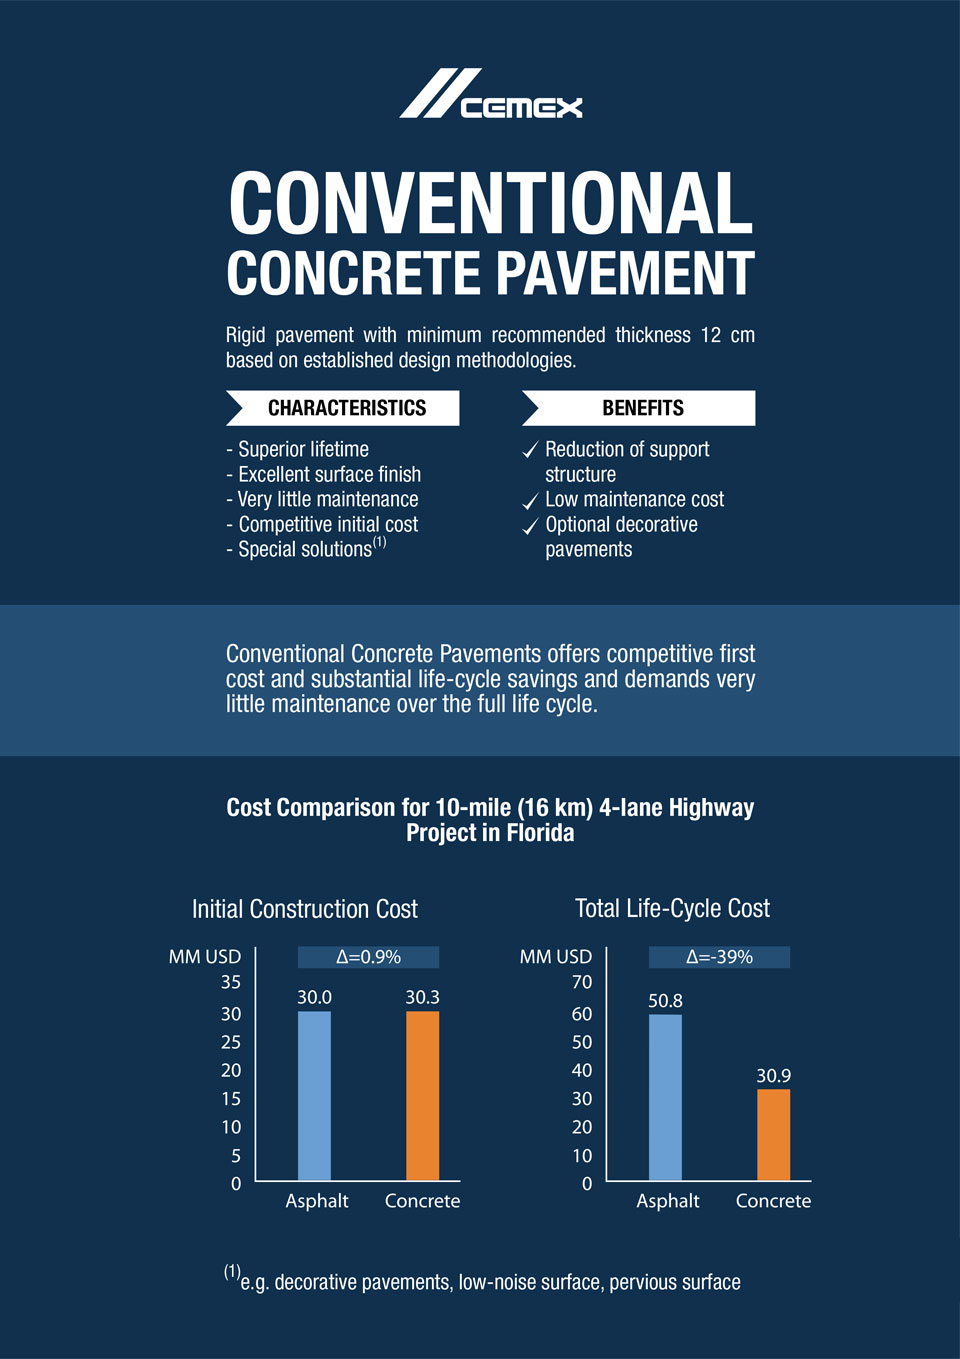 the image shows some characteristcs and benefits of conventional concrete pavement